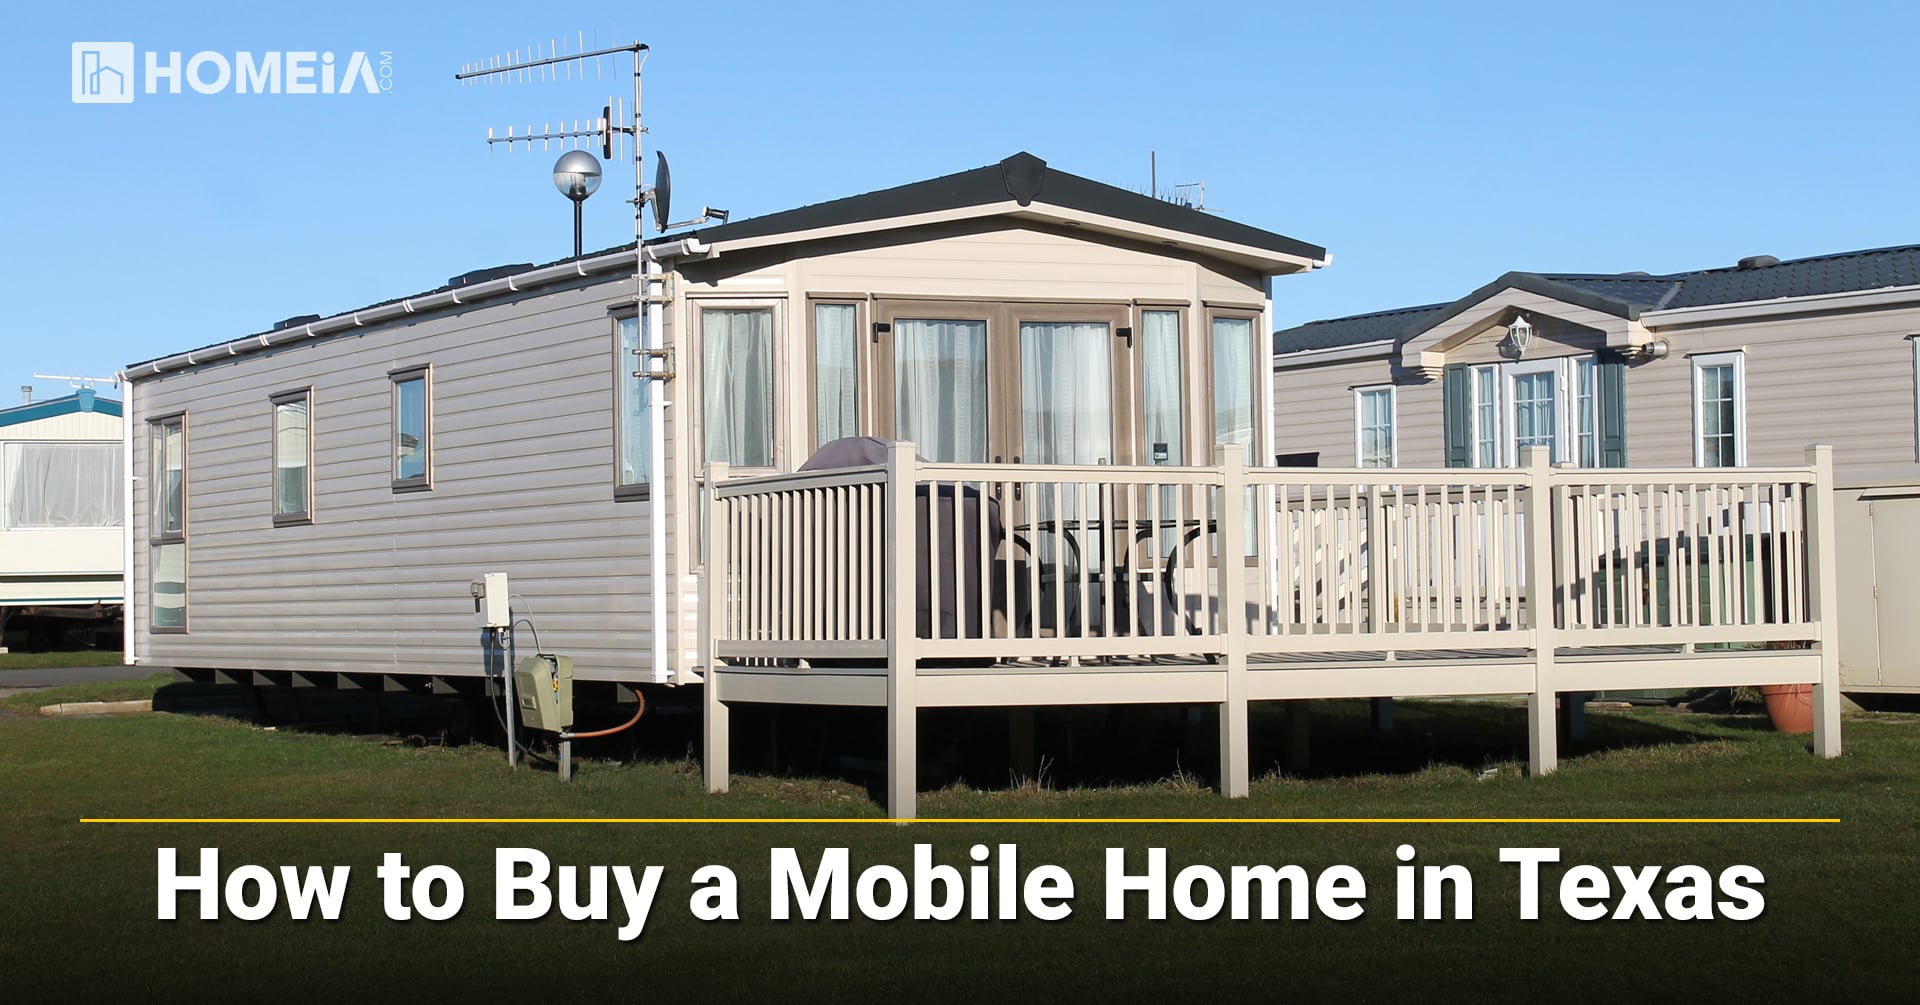 20 Key Steps to Buy a Mobile Home in Texas   HOMEiA